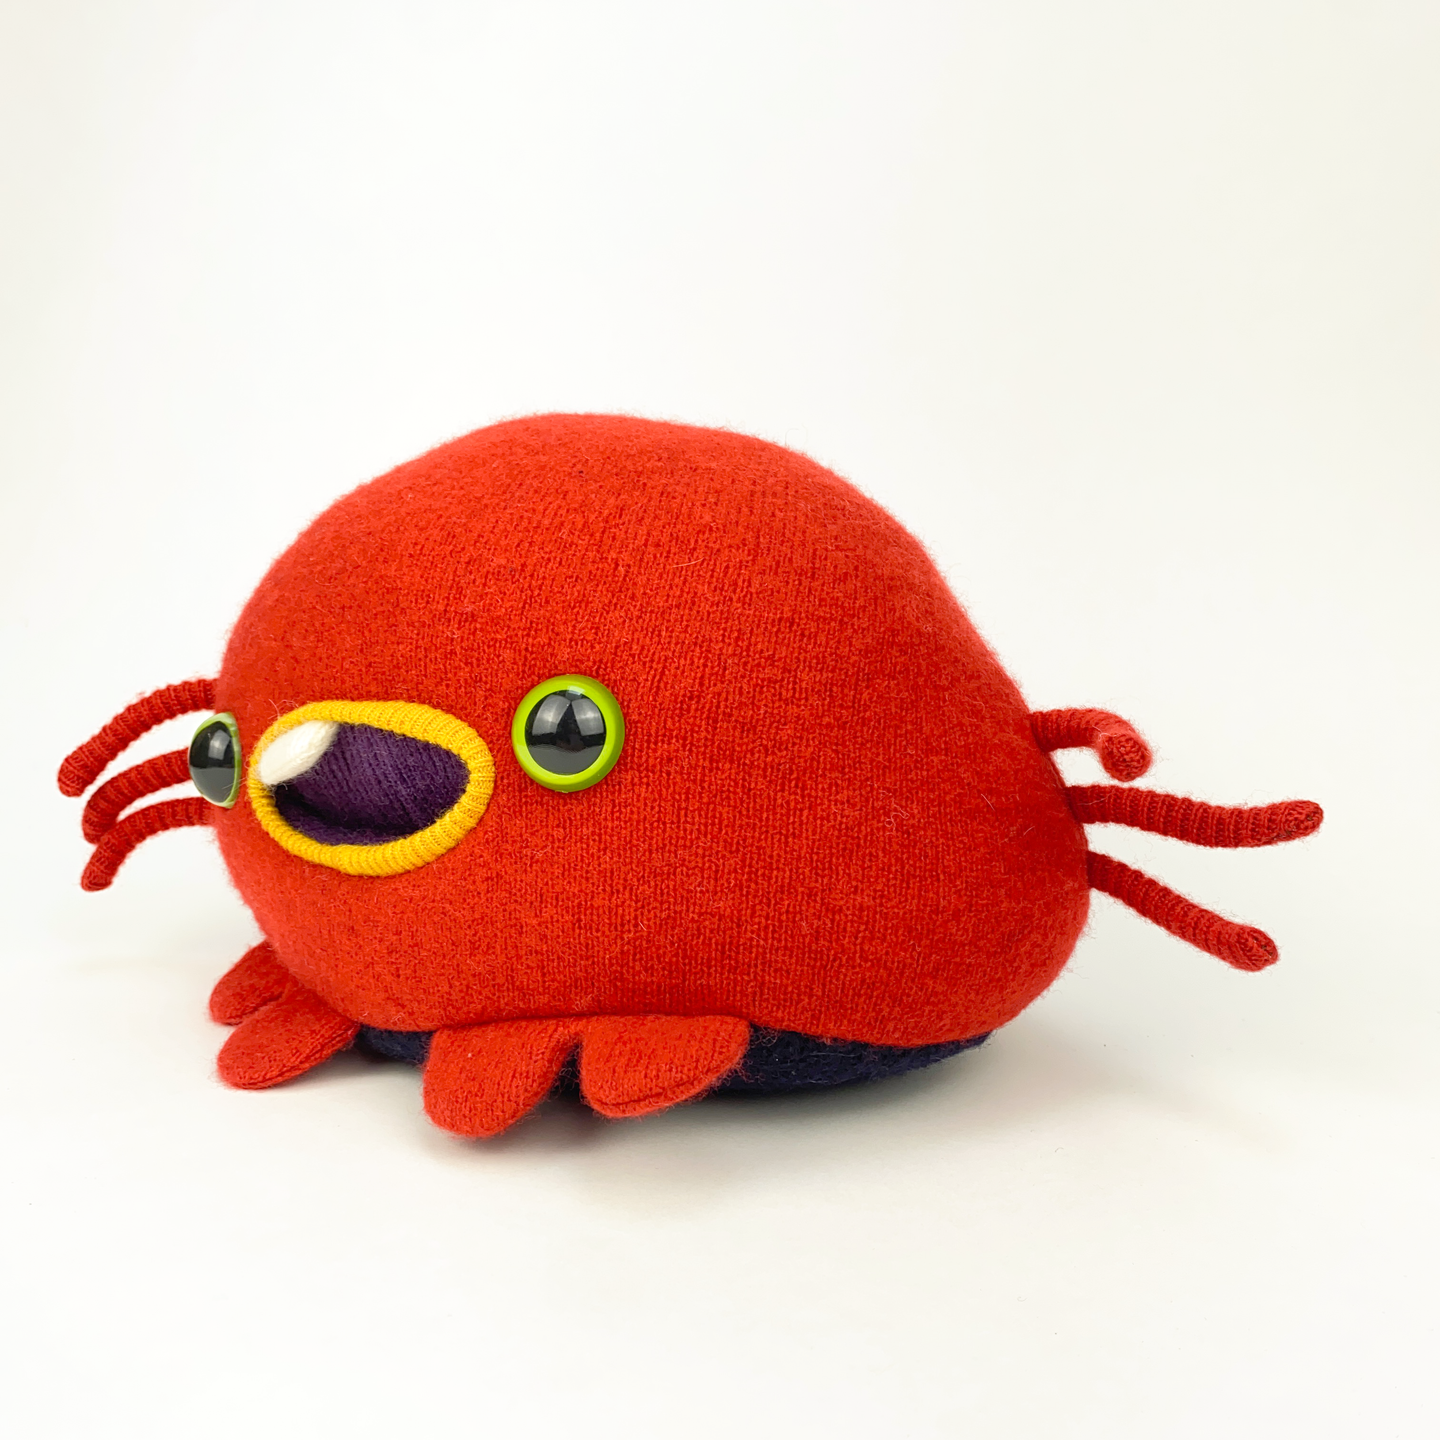 Tomato the red plush my friend monster™